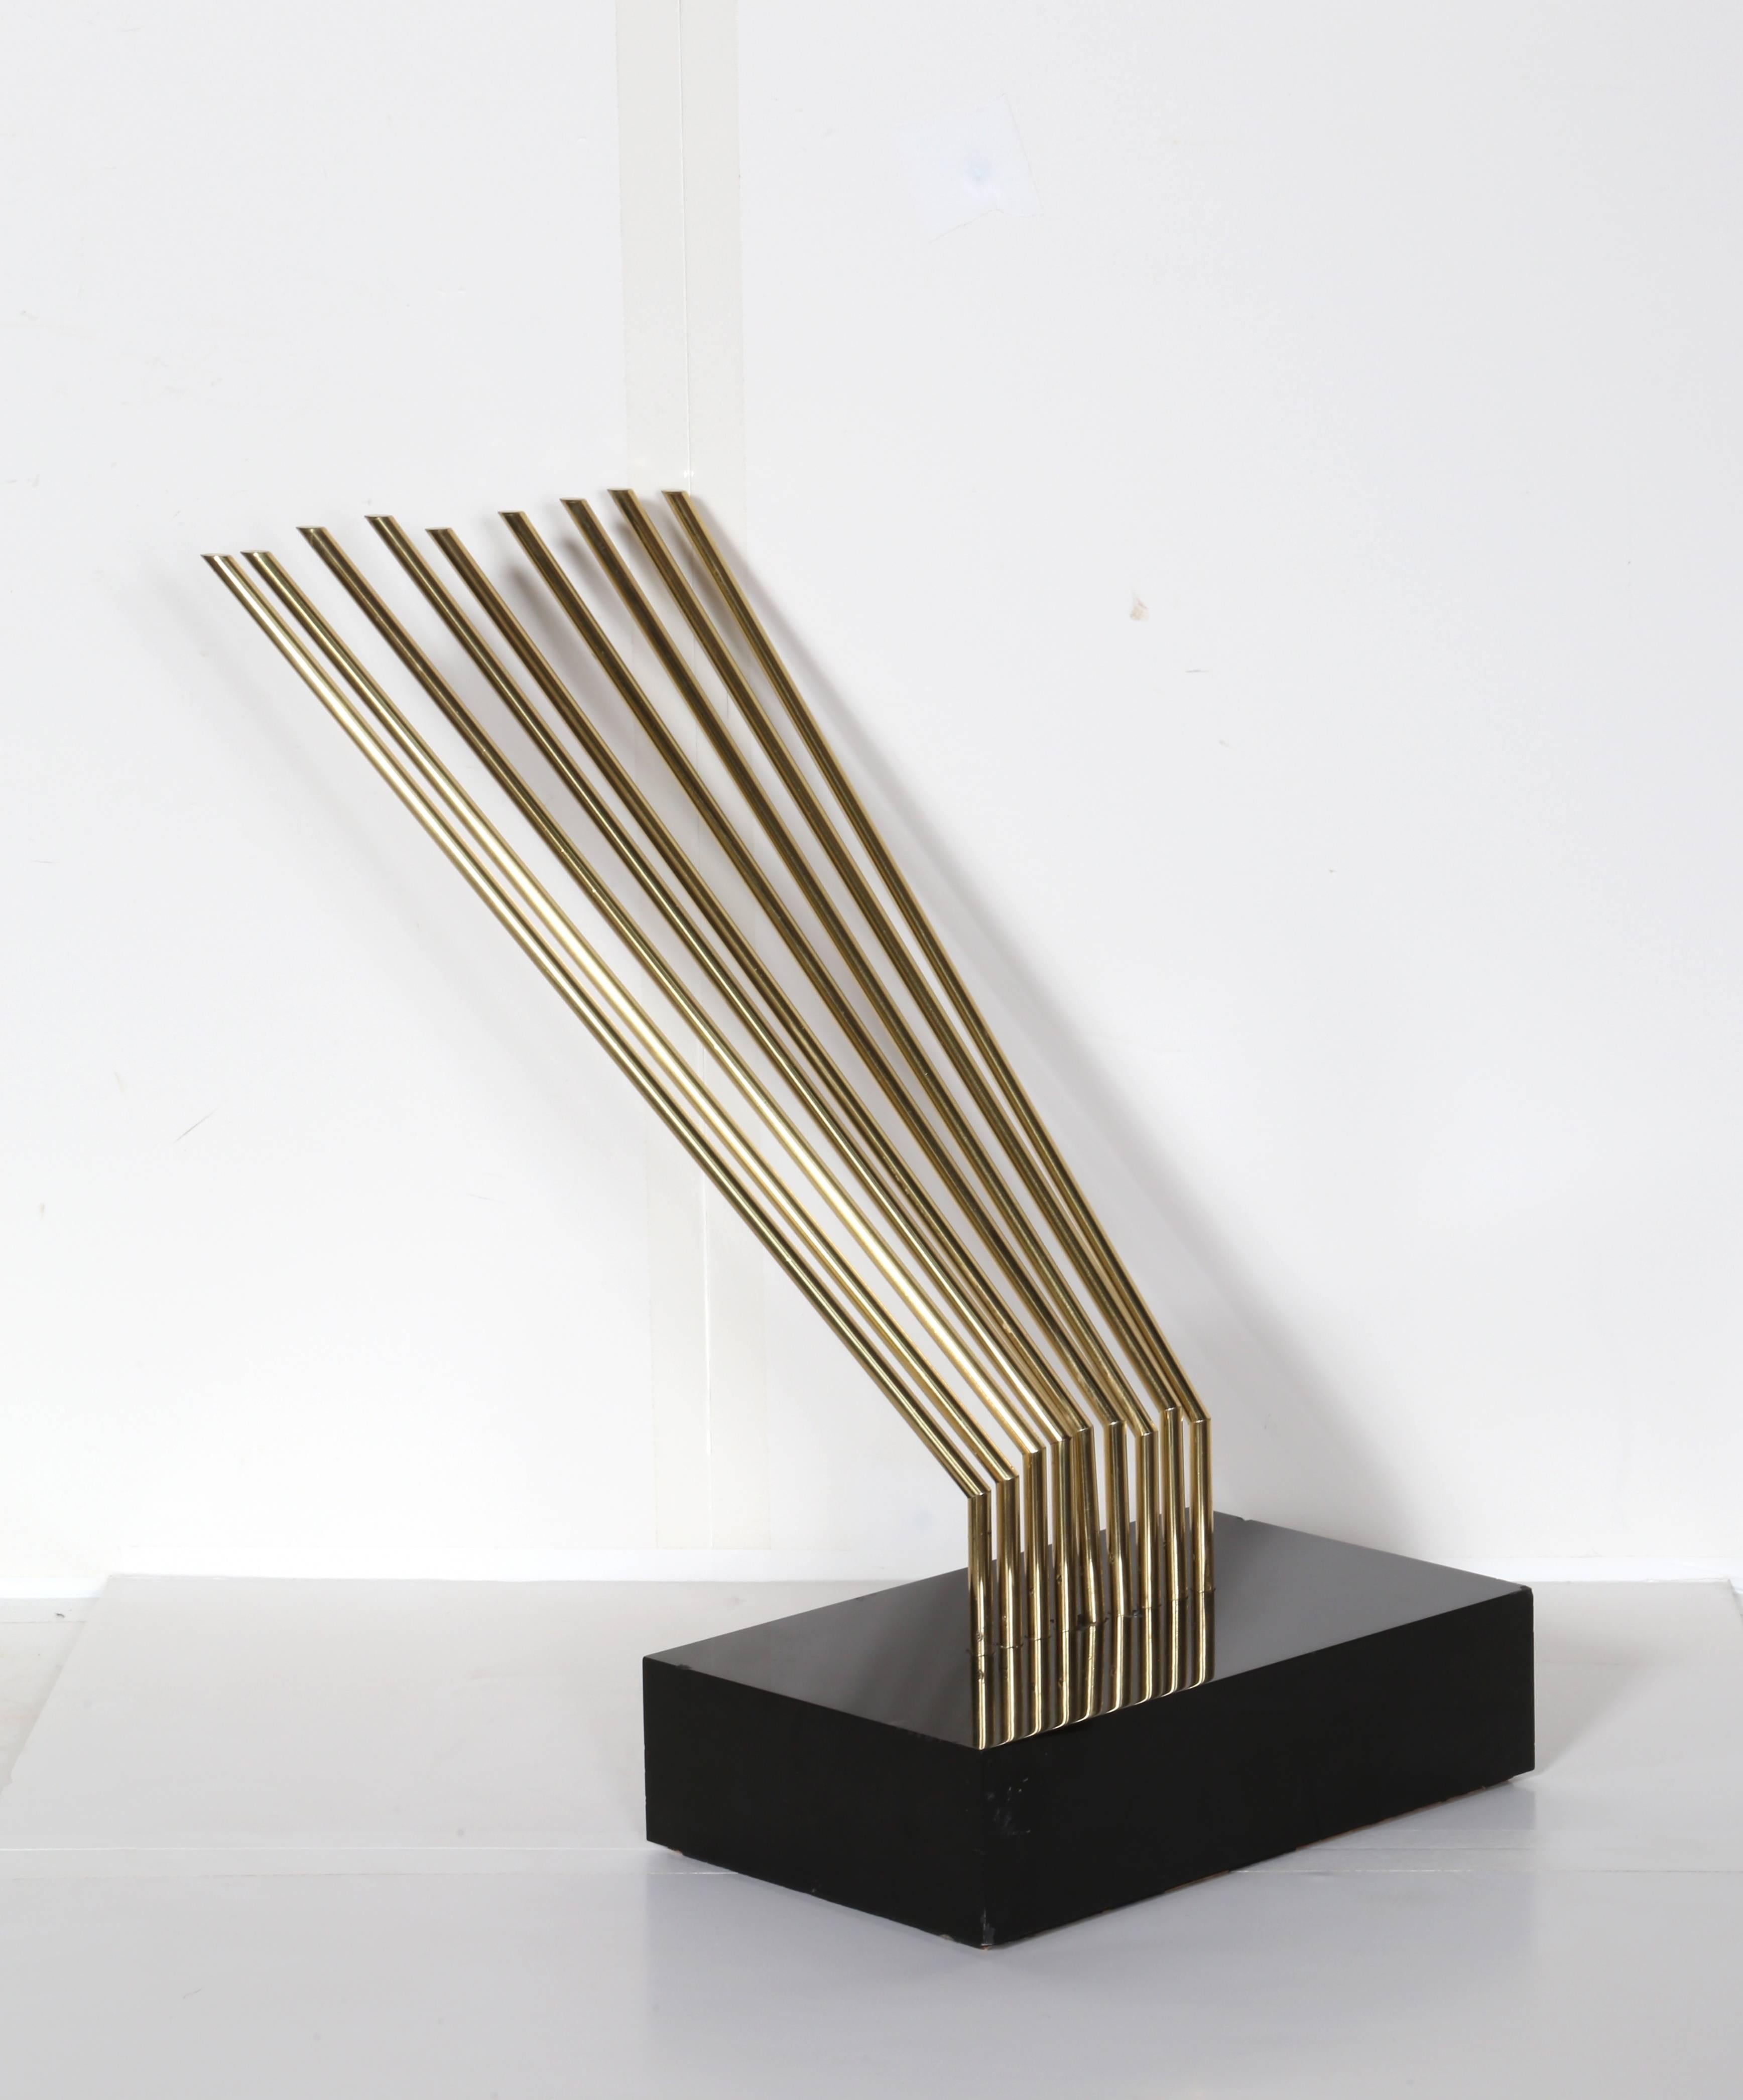 Yaacov Agam Abstract Sculpture - In all Directions (Toutes Directions)